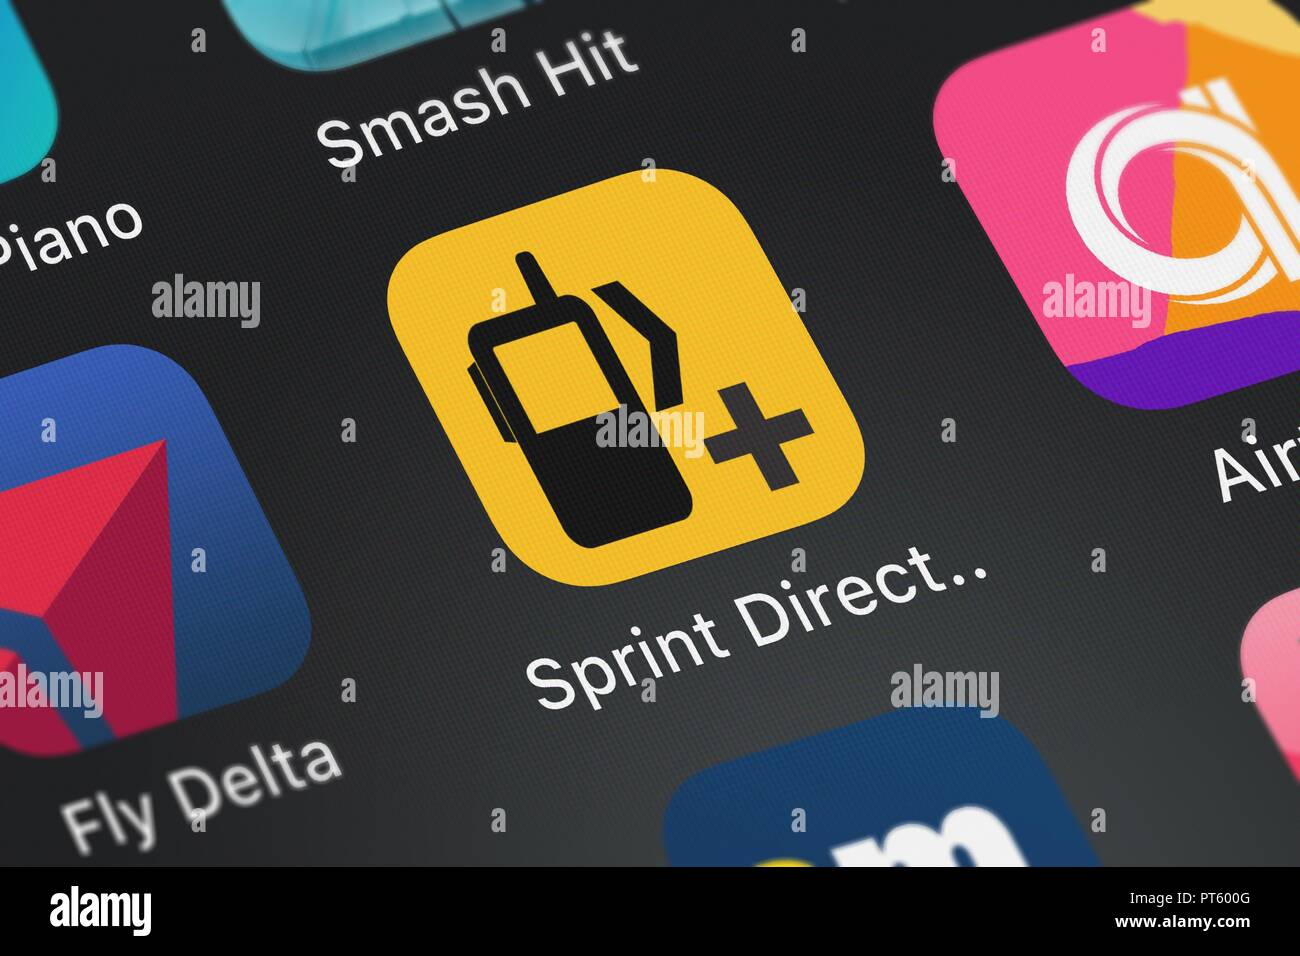 London, United Kingdom - October 06, 2018: Screenshot of Sprint's mobile app Sprint Direct Connect Plus. Stock Photo